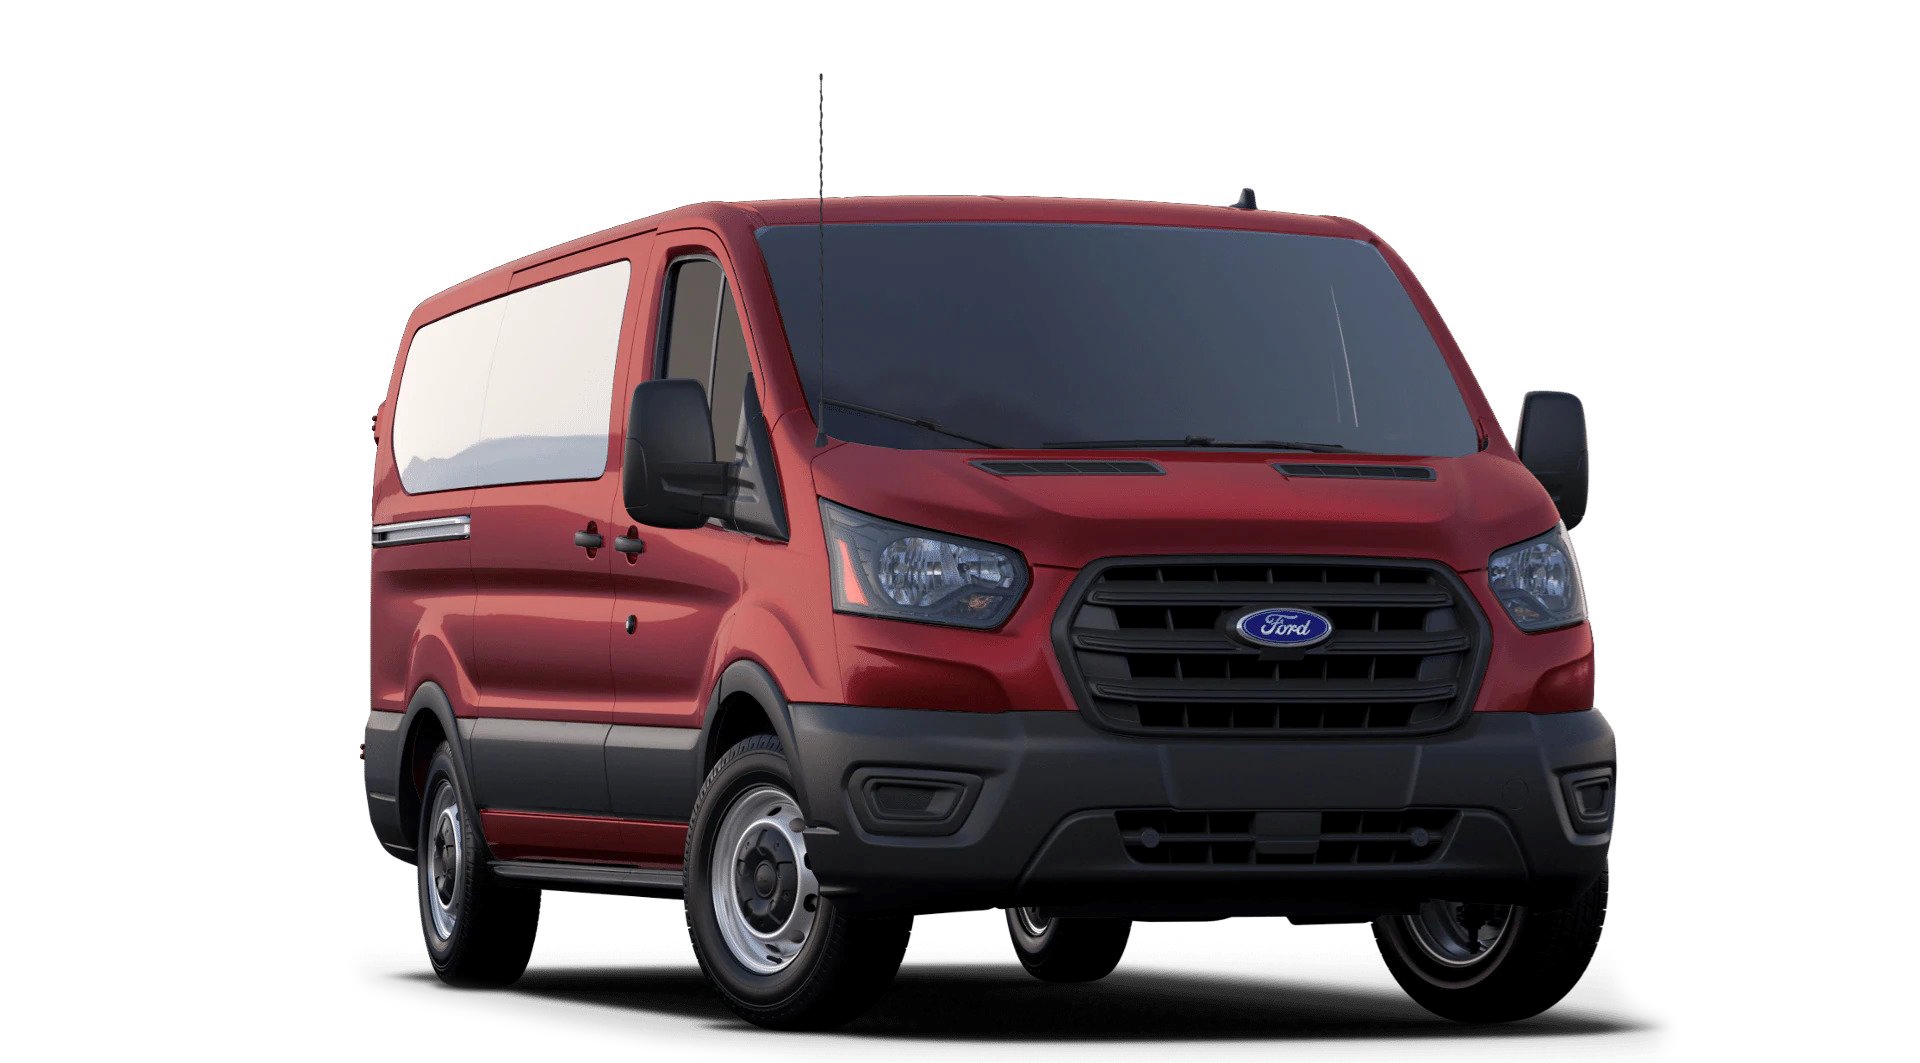 2022 Ford Transit Passenger Van 150 XL Full Specs, Features and Price